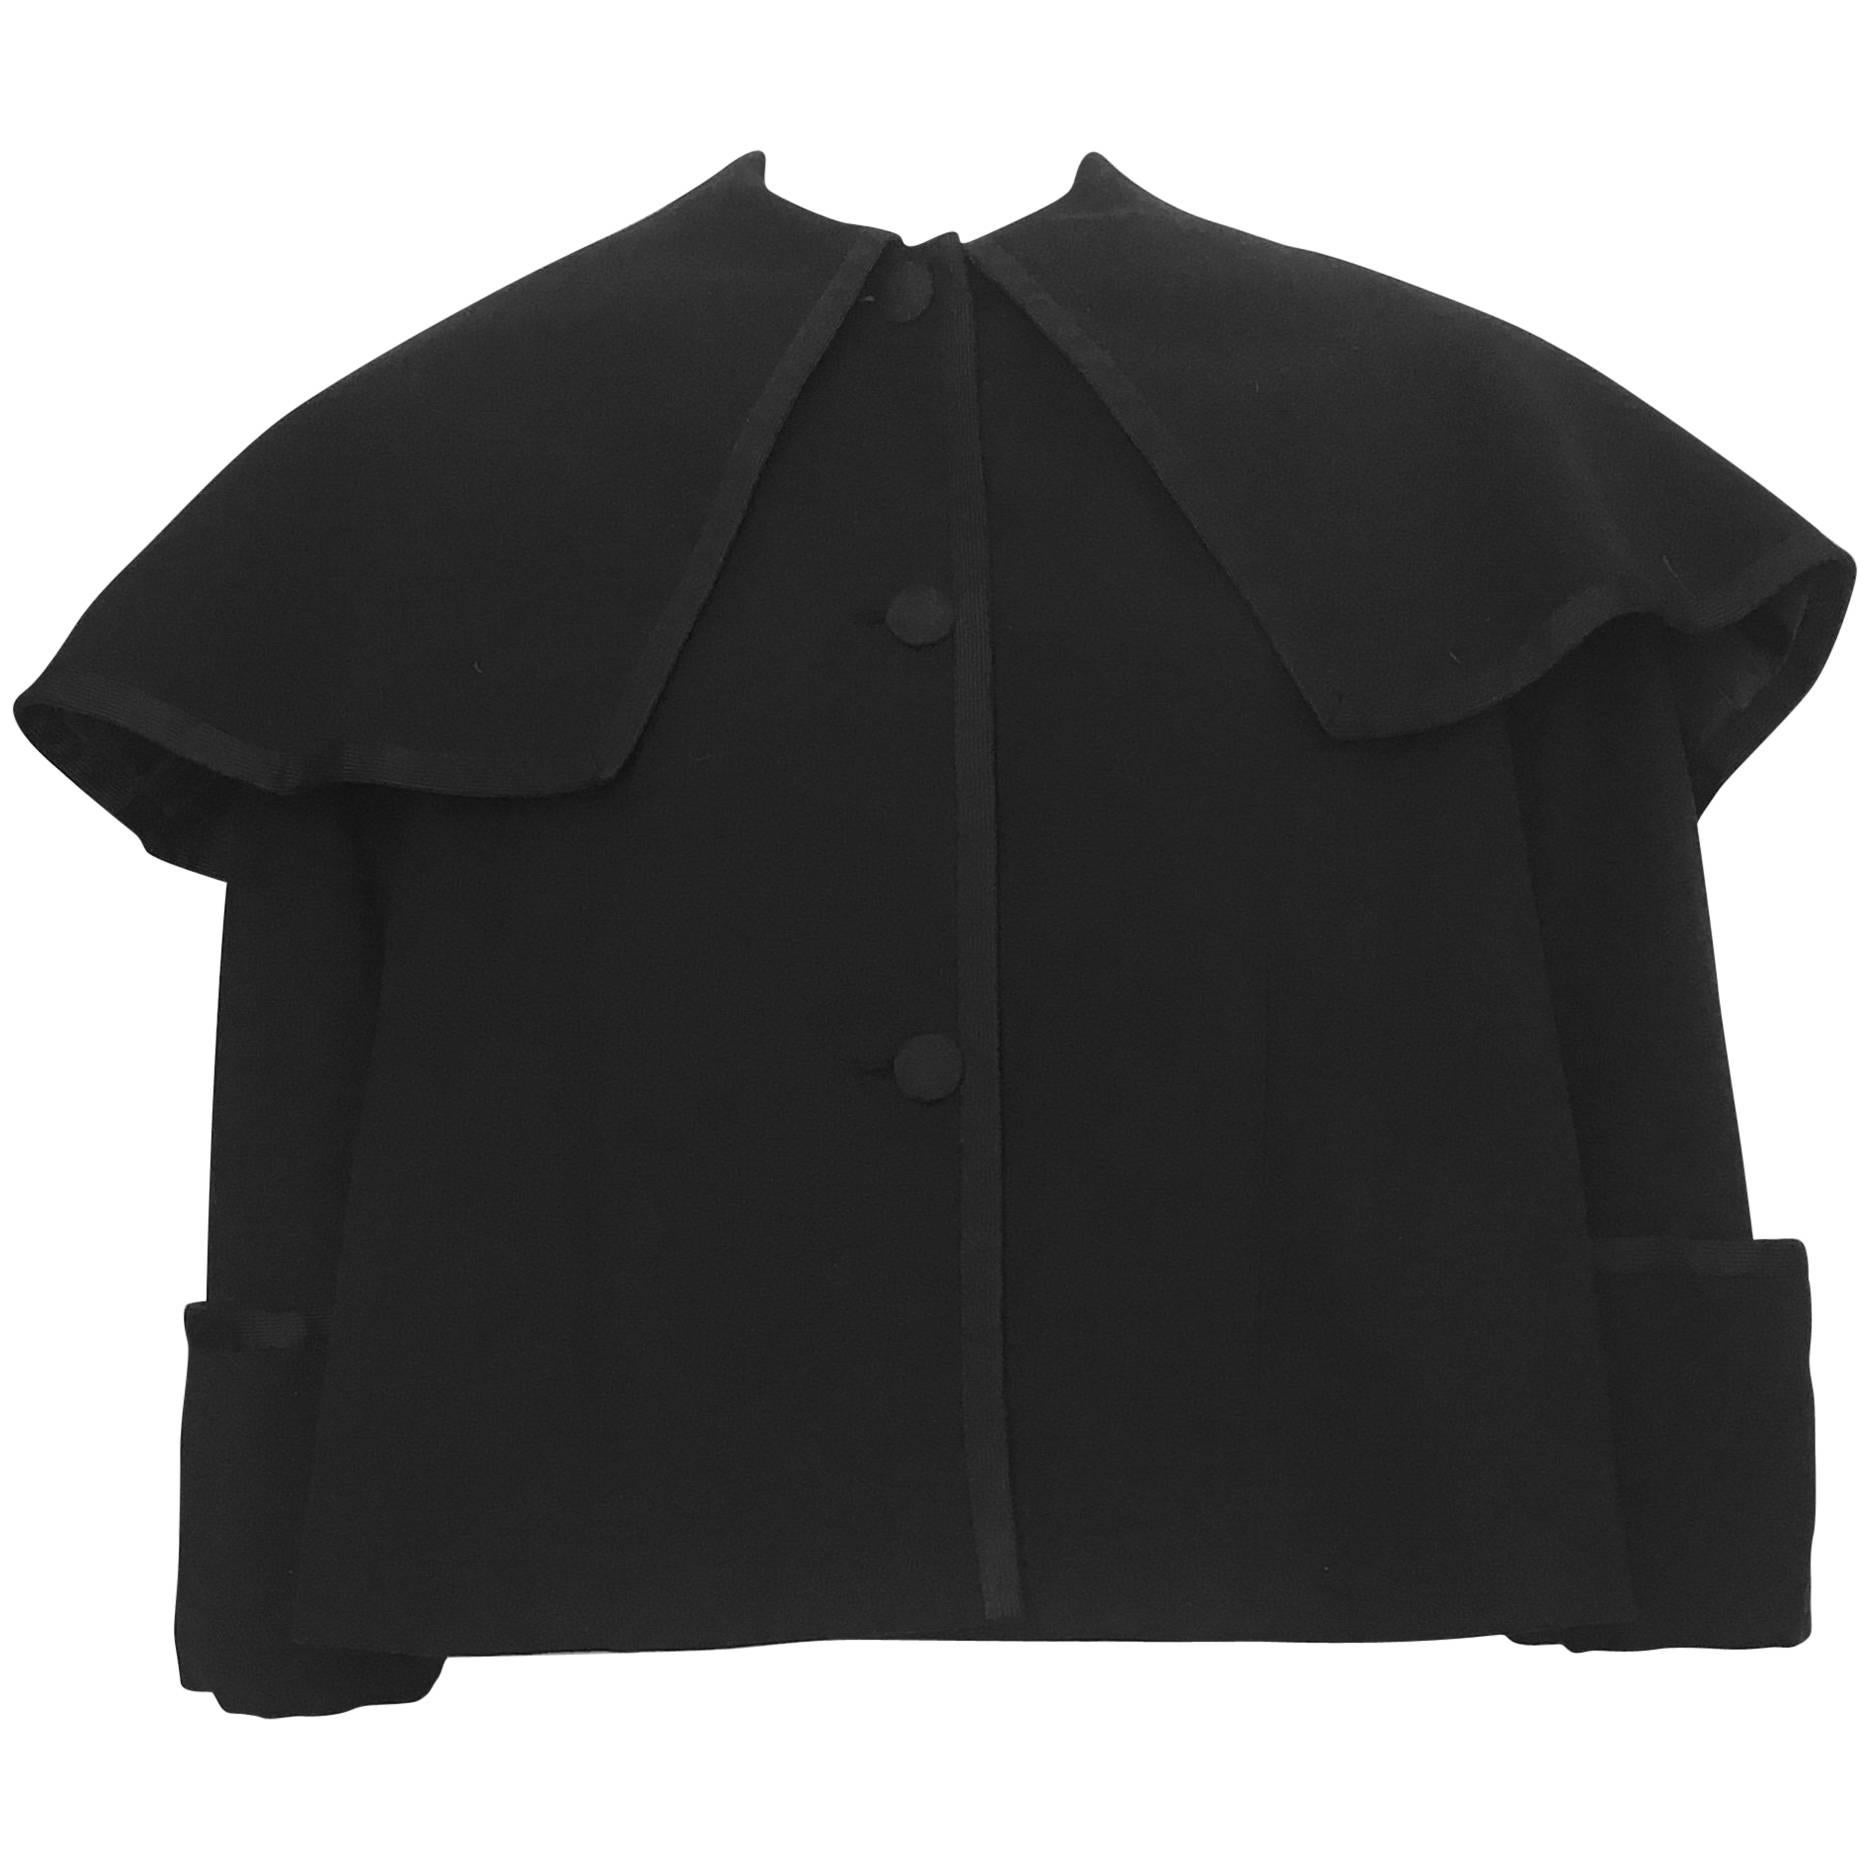 Traina-Norell 1950s Black Wool Cropped Capelet Jacket Size 6 / 8. For Sale